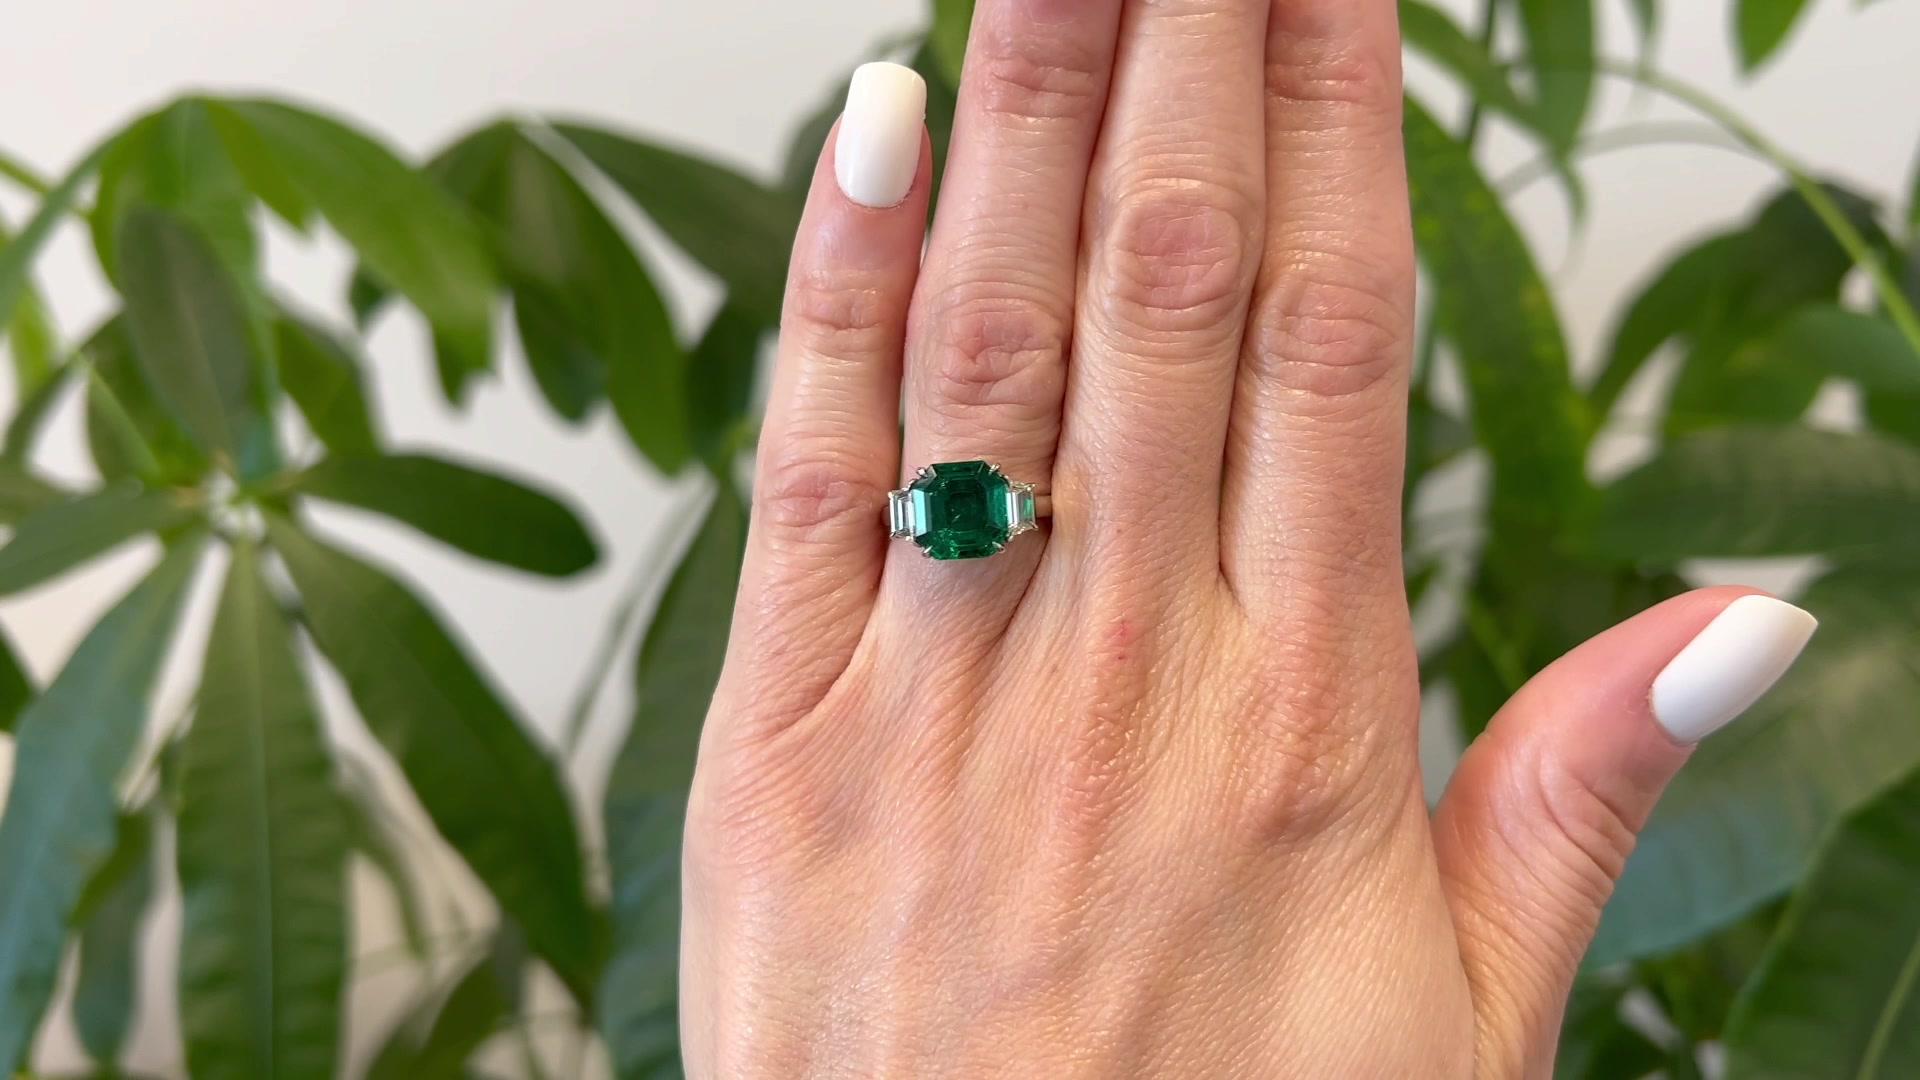 Trapezoid Cut Vintage AGL SSEF 2.51 Carats Colombian Emerald Diamond Platinum Ring For Sale